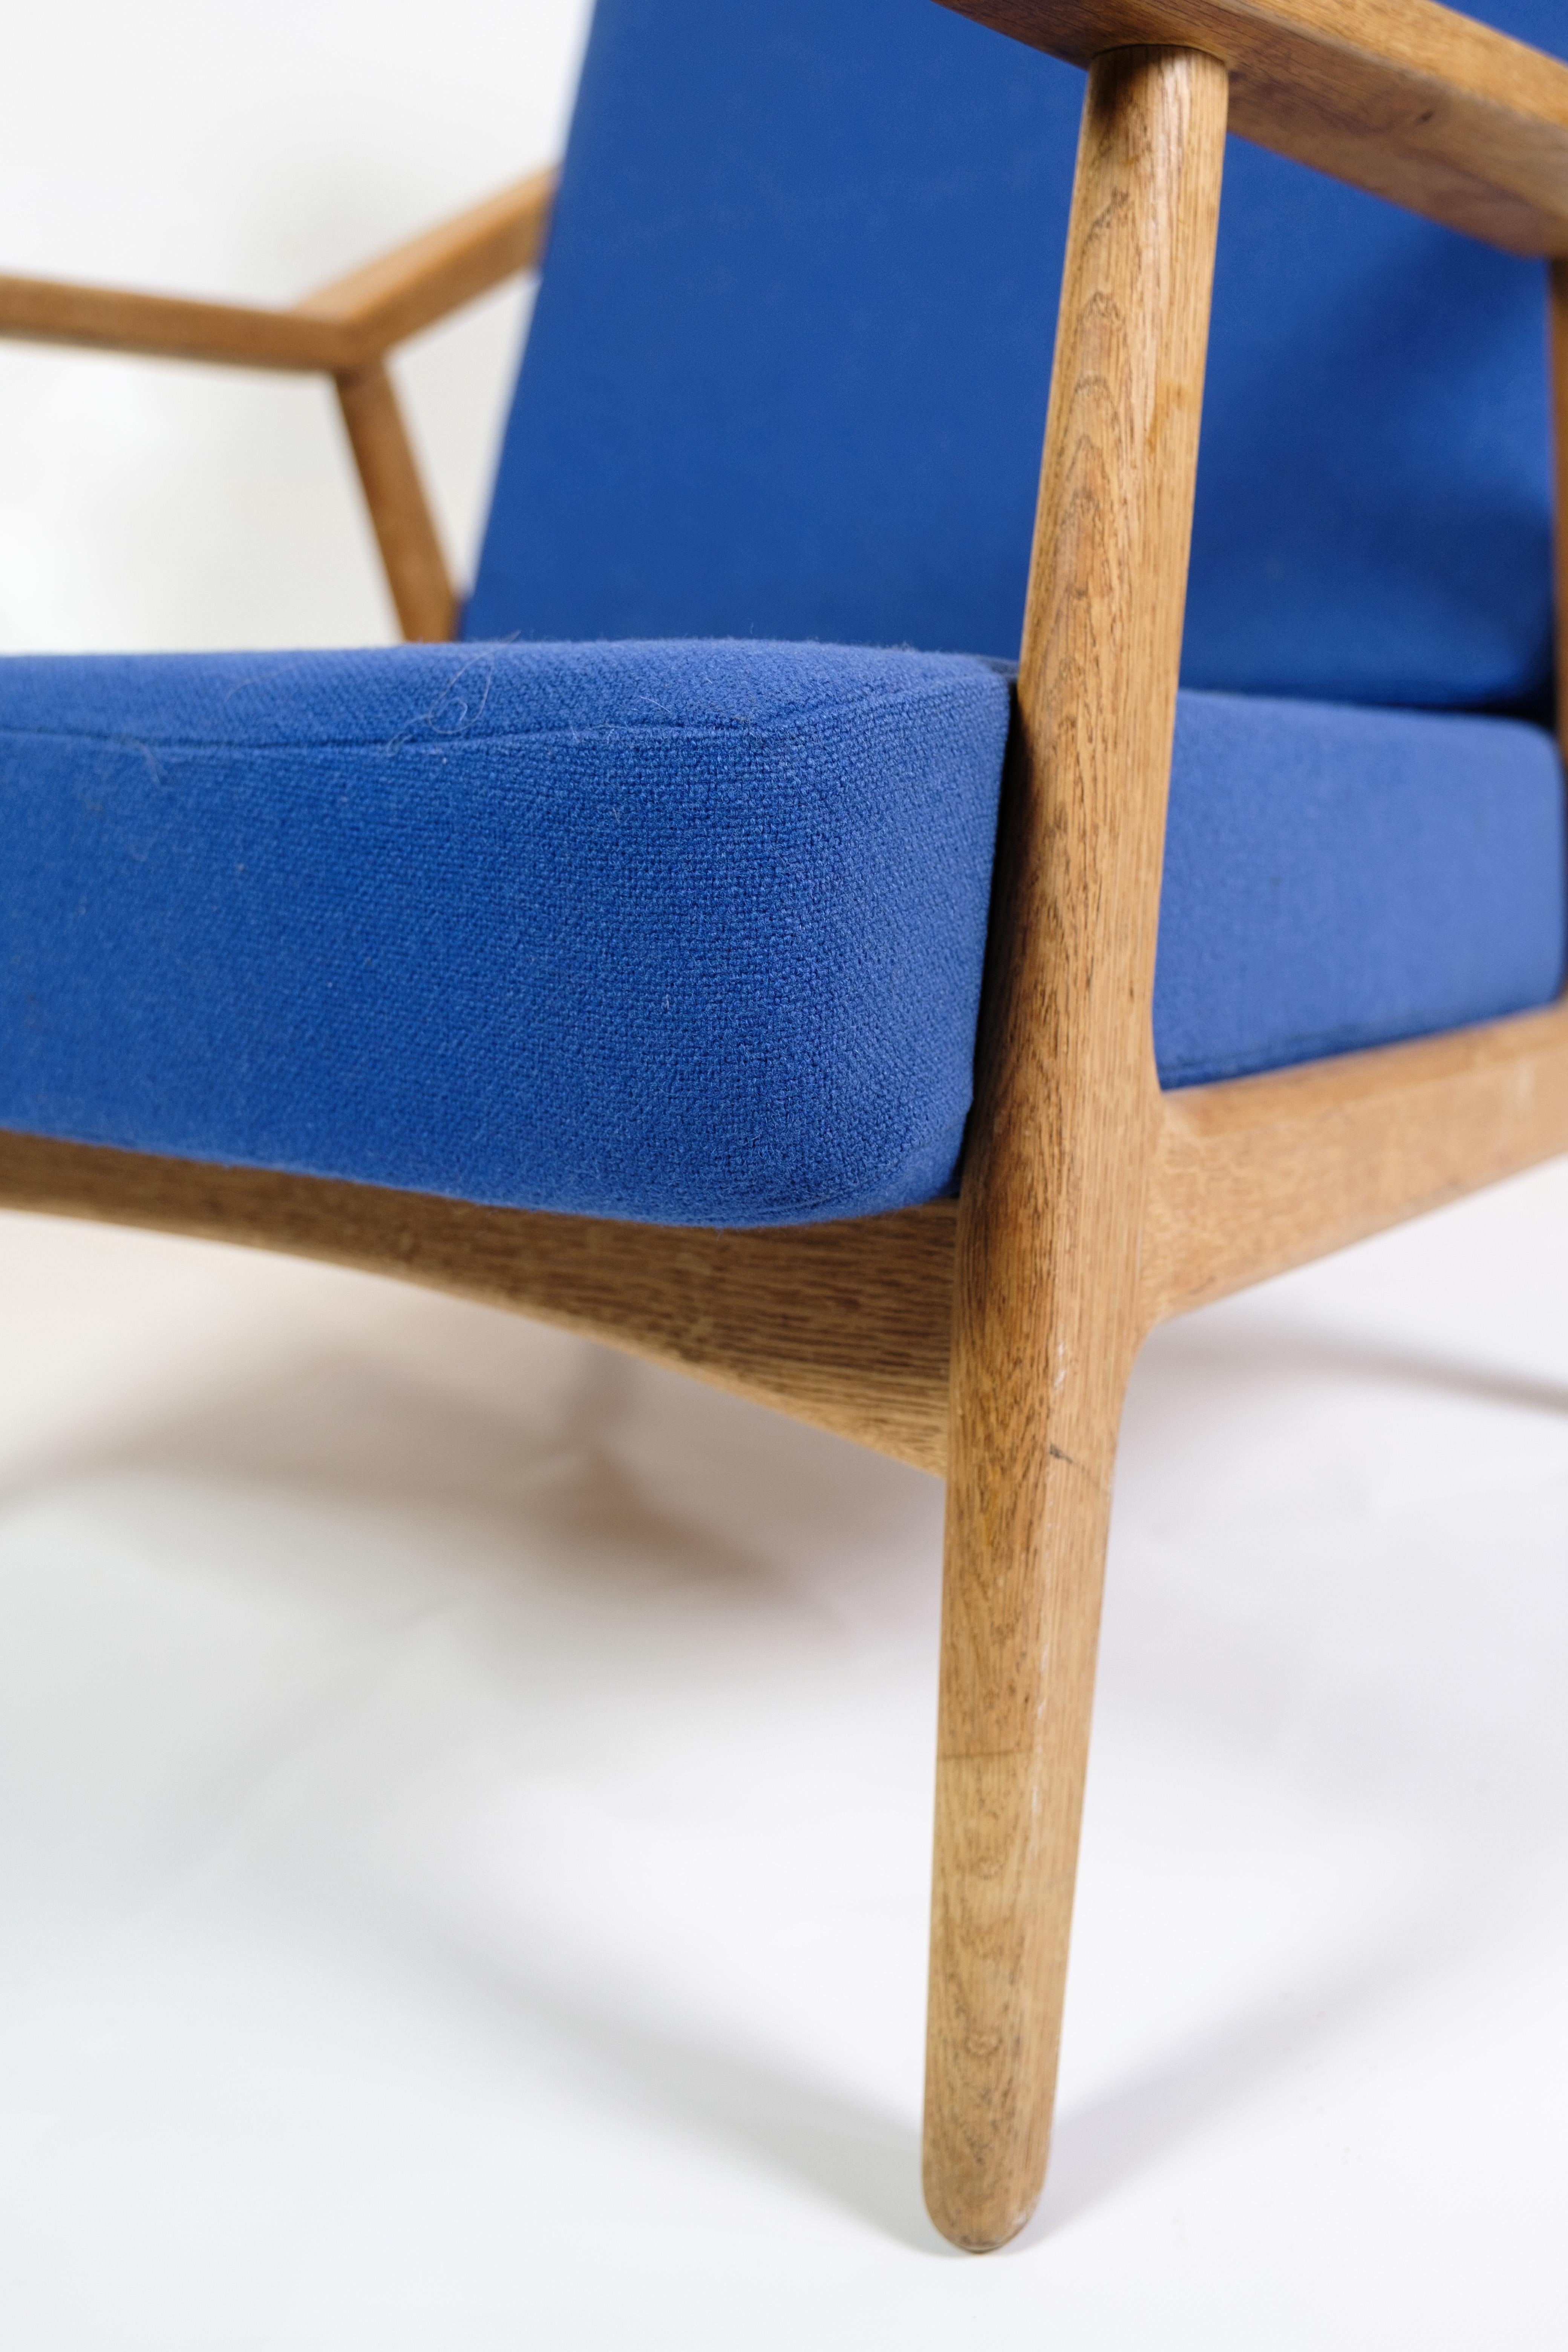 1960s Oak Armchair Designed by H. Brockmann-Petersen, Upholstered in Blue Fabric

This oak armchair, a design attributed to H. Brockmann-Petersen and crafted around the 1960s, represents a quintessential piece of mid-century furniture.

The chair's